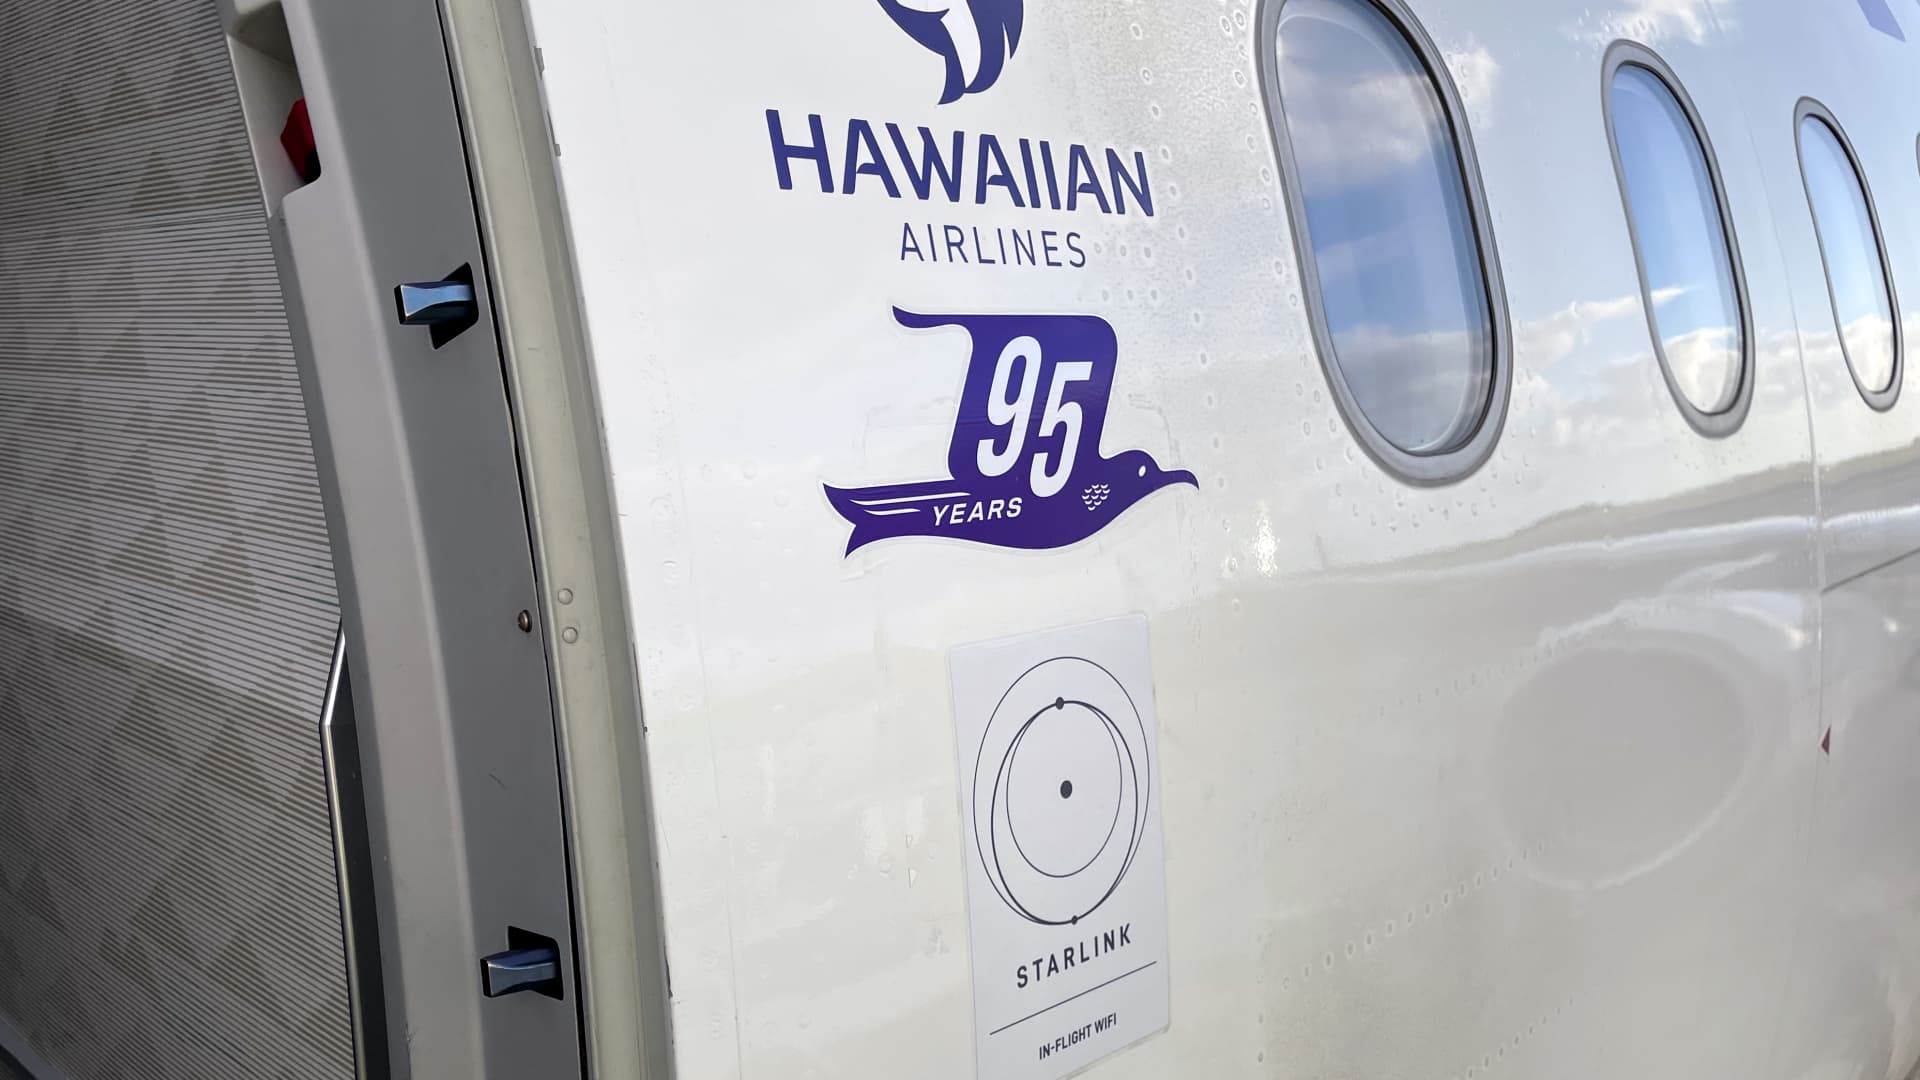 Hawaiian Airlines debuts free inflight Wi-Fi from SpaceX's Starlink